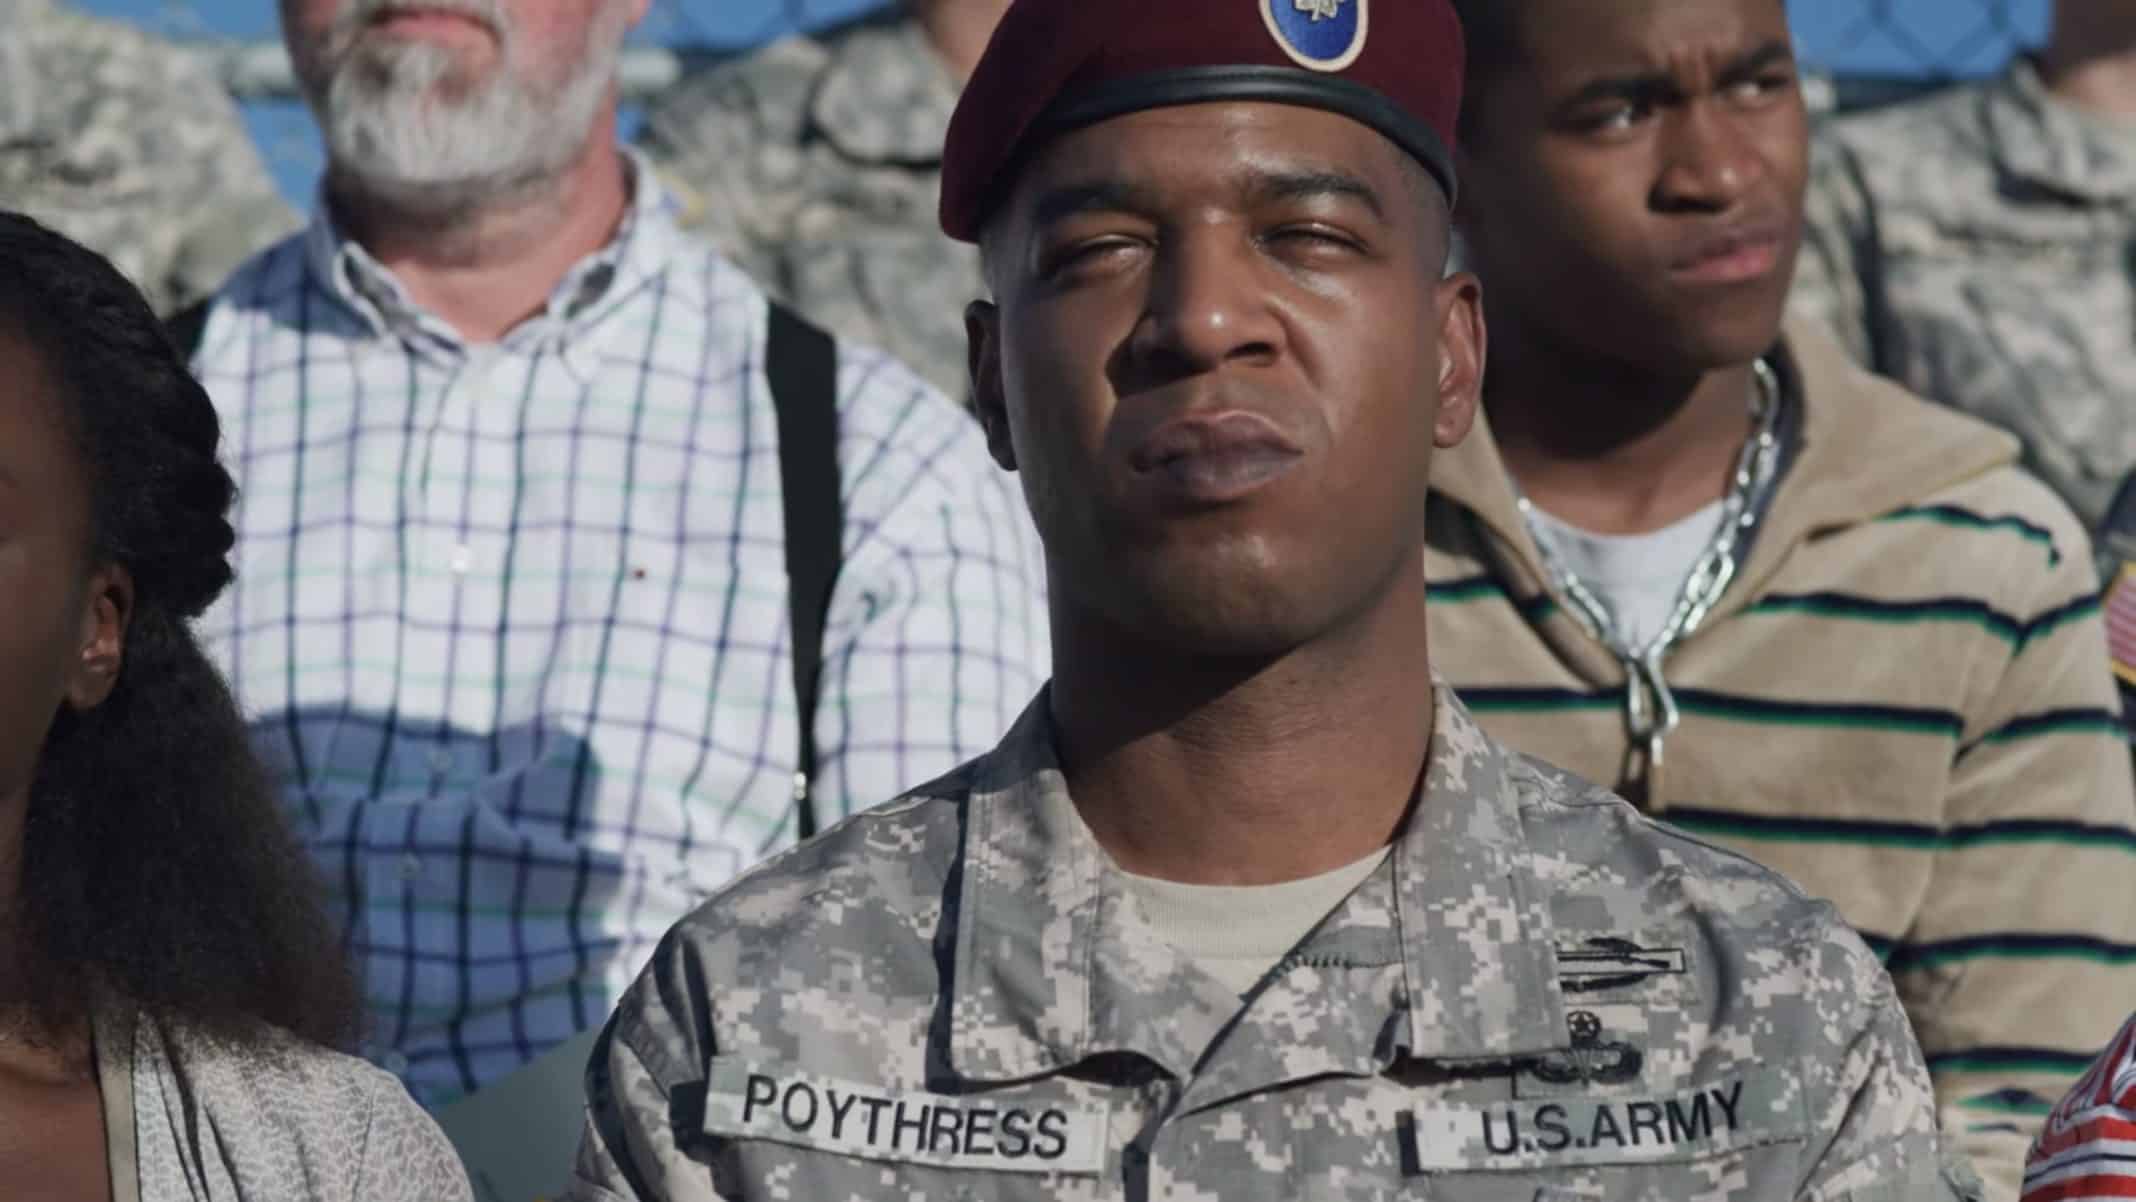 Richard (Kid Cudi) during Sarah's ceremony to become commander.